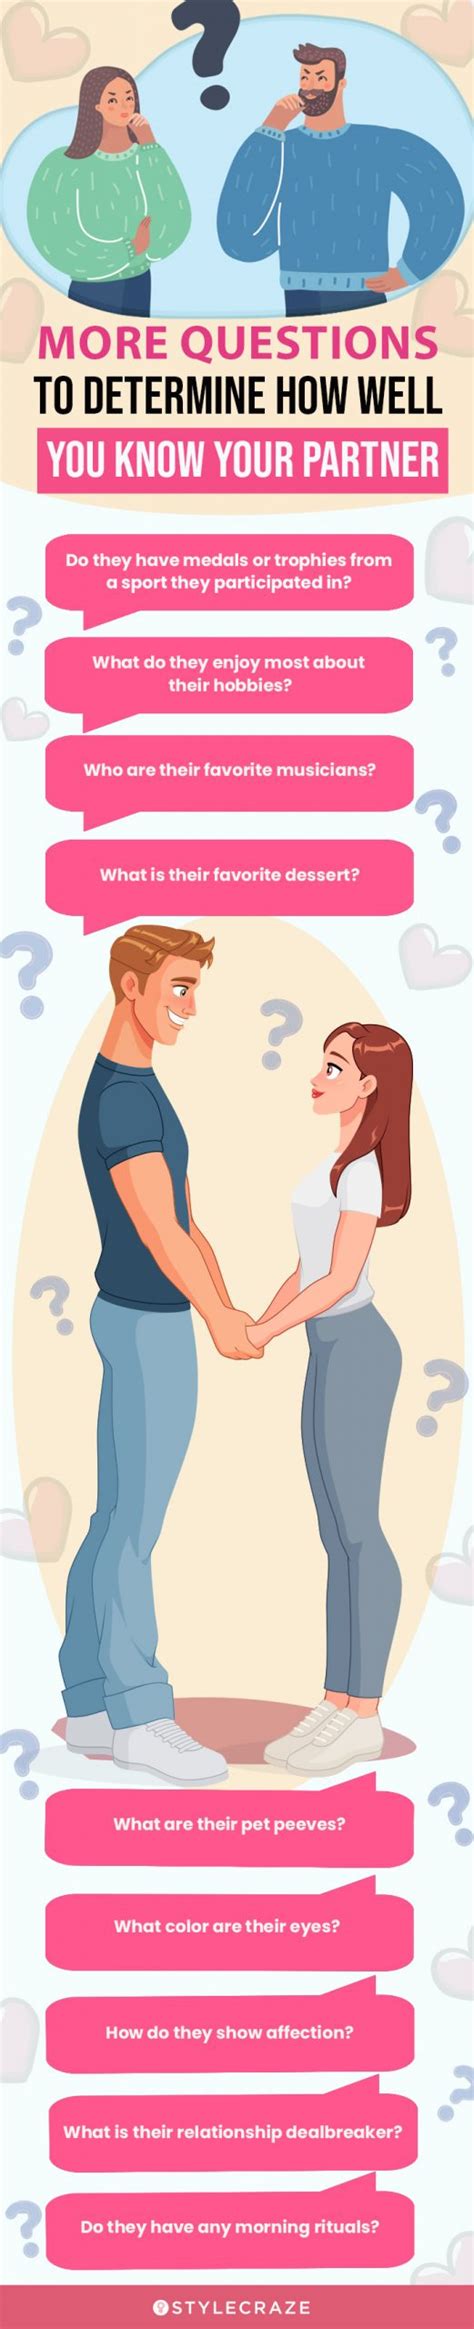 Questions To Determine How Well You Know Your Partner